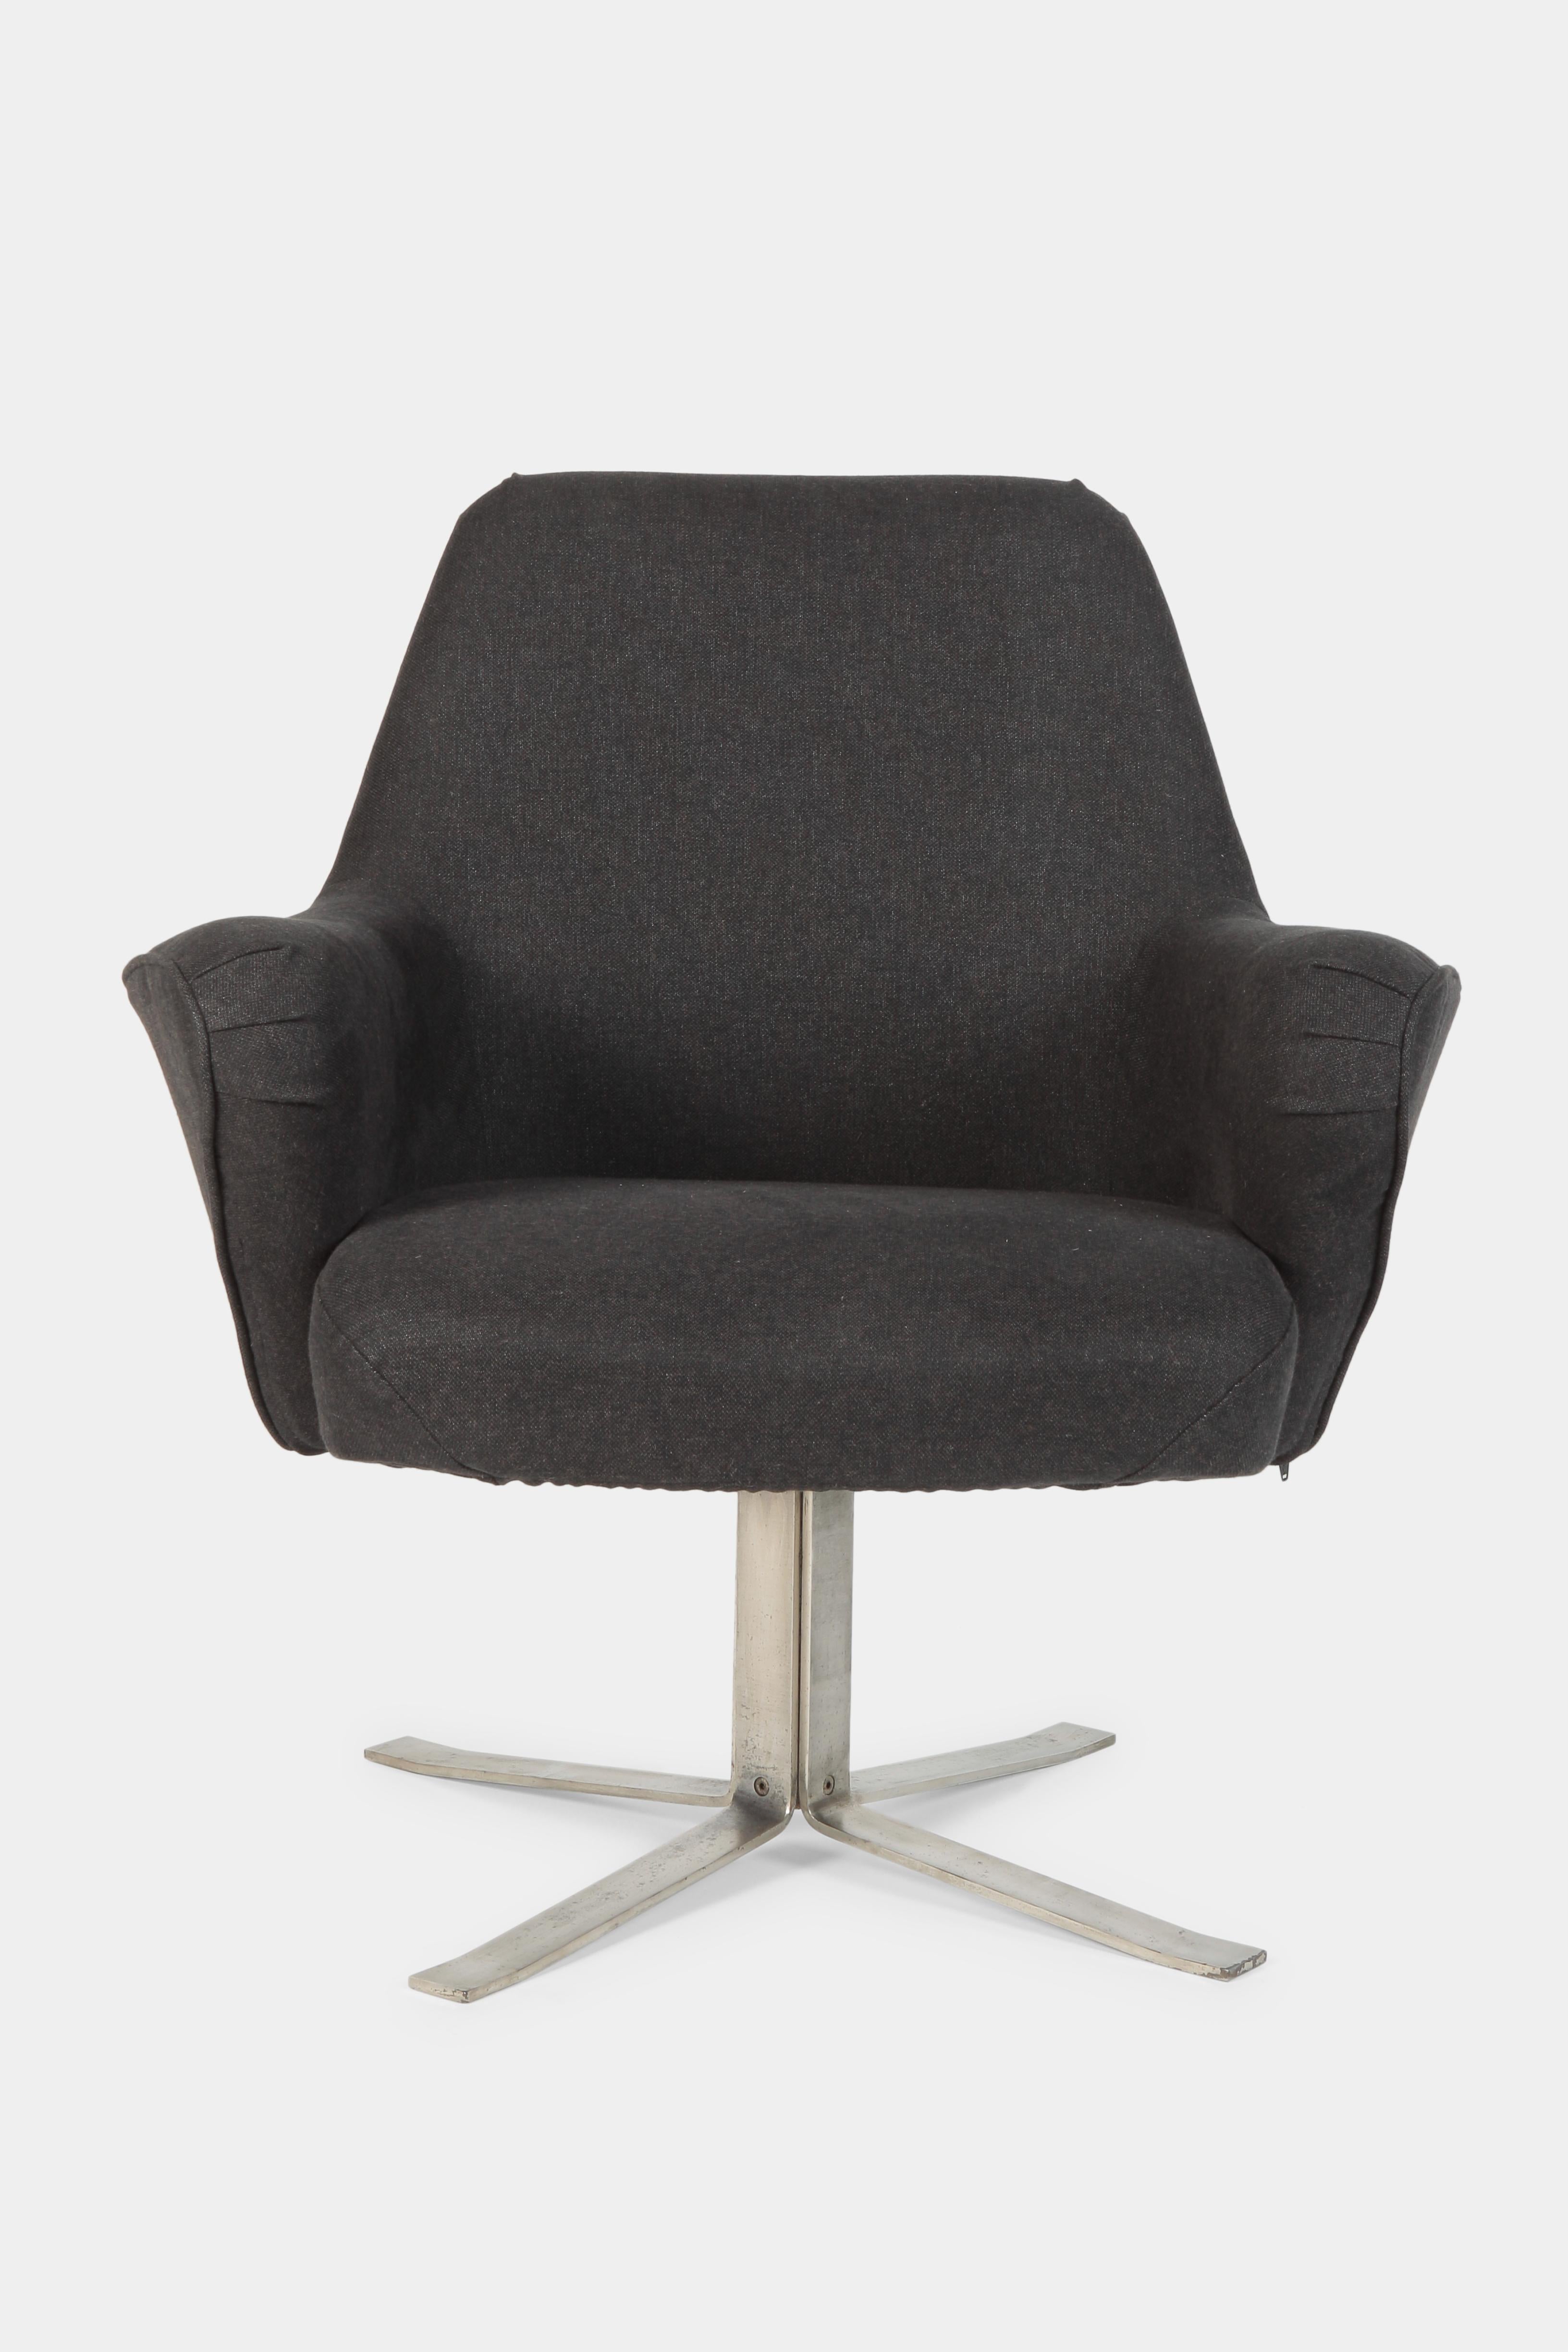 Giulio Moscatelli “Dolly” lounge chair manufactured by Forma Nova in the 1960s in Italy. Swivel lounge chair, newly covered with anthracite cotton fabric. Base is made of four bent chrome steel elements, with nice patina and sticker of the